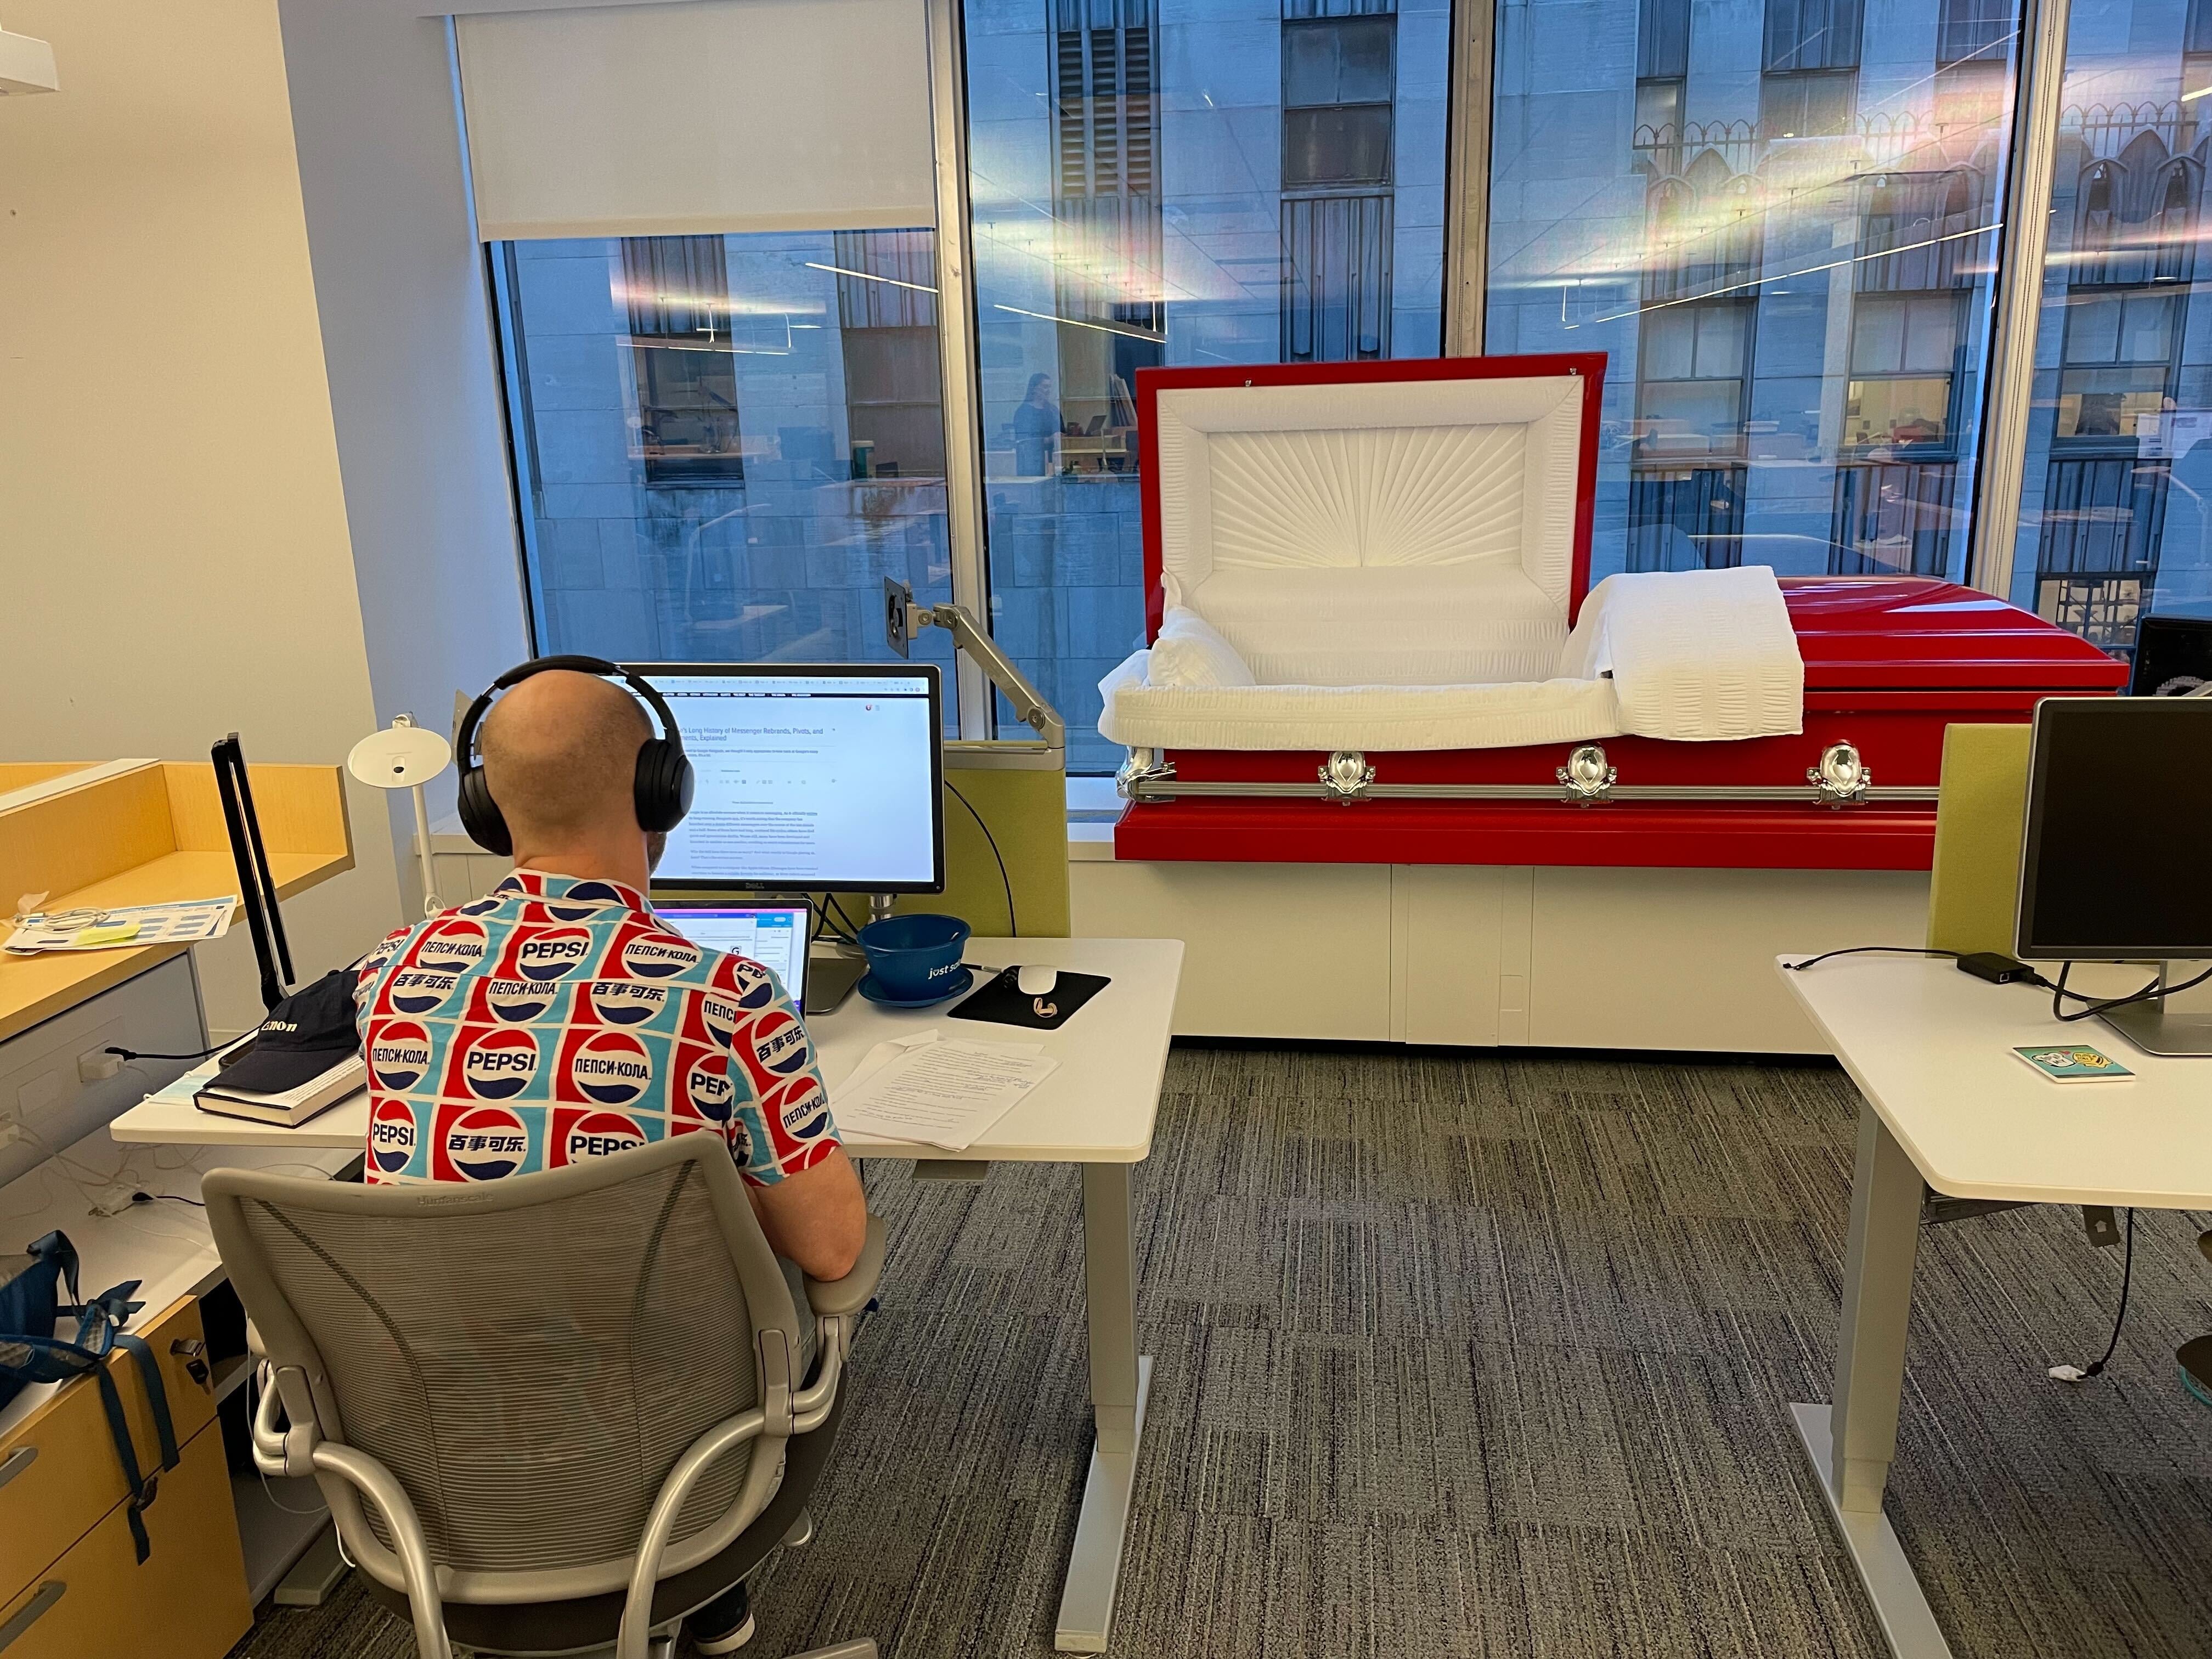 The casket situated in Gizmodo's Midtown Manhattan office. (Image: Kevin Hurler (Gizmodo))